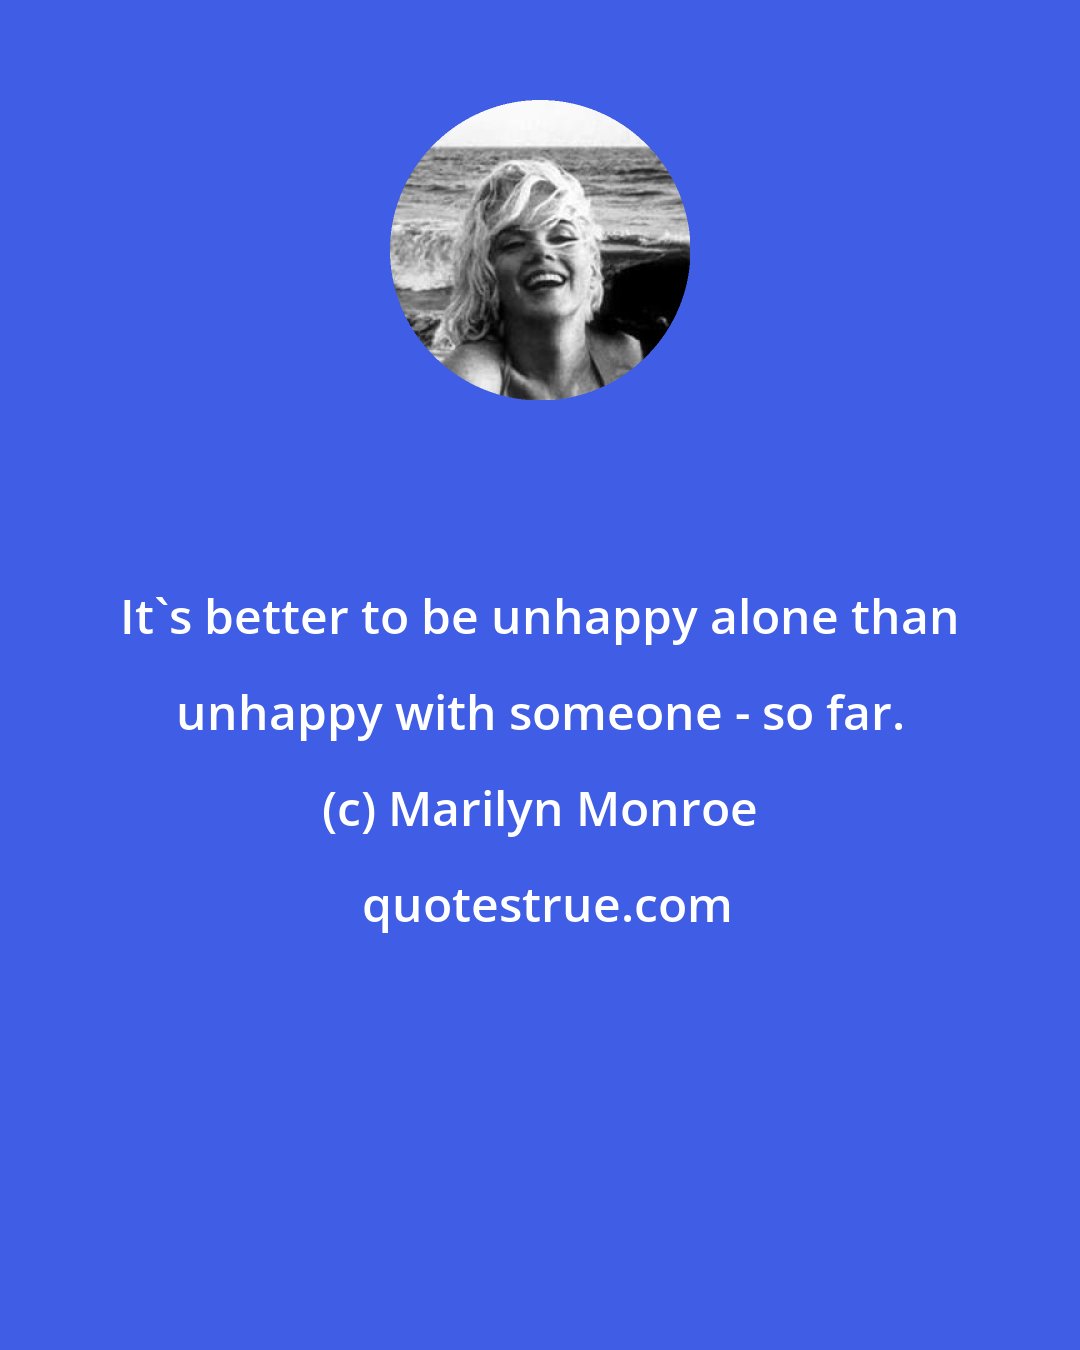 Marilyn Monroe: It's better to be unhappy alone than unhappy with someone - so far.